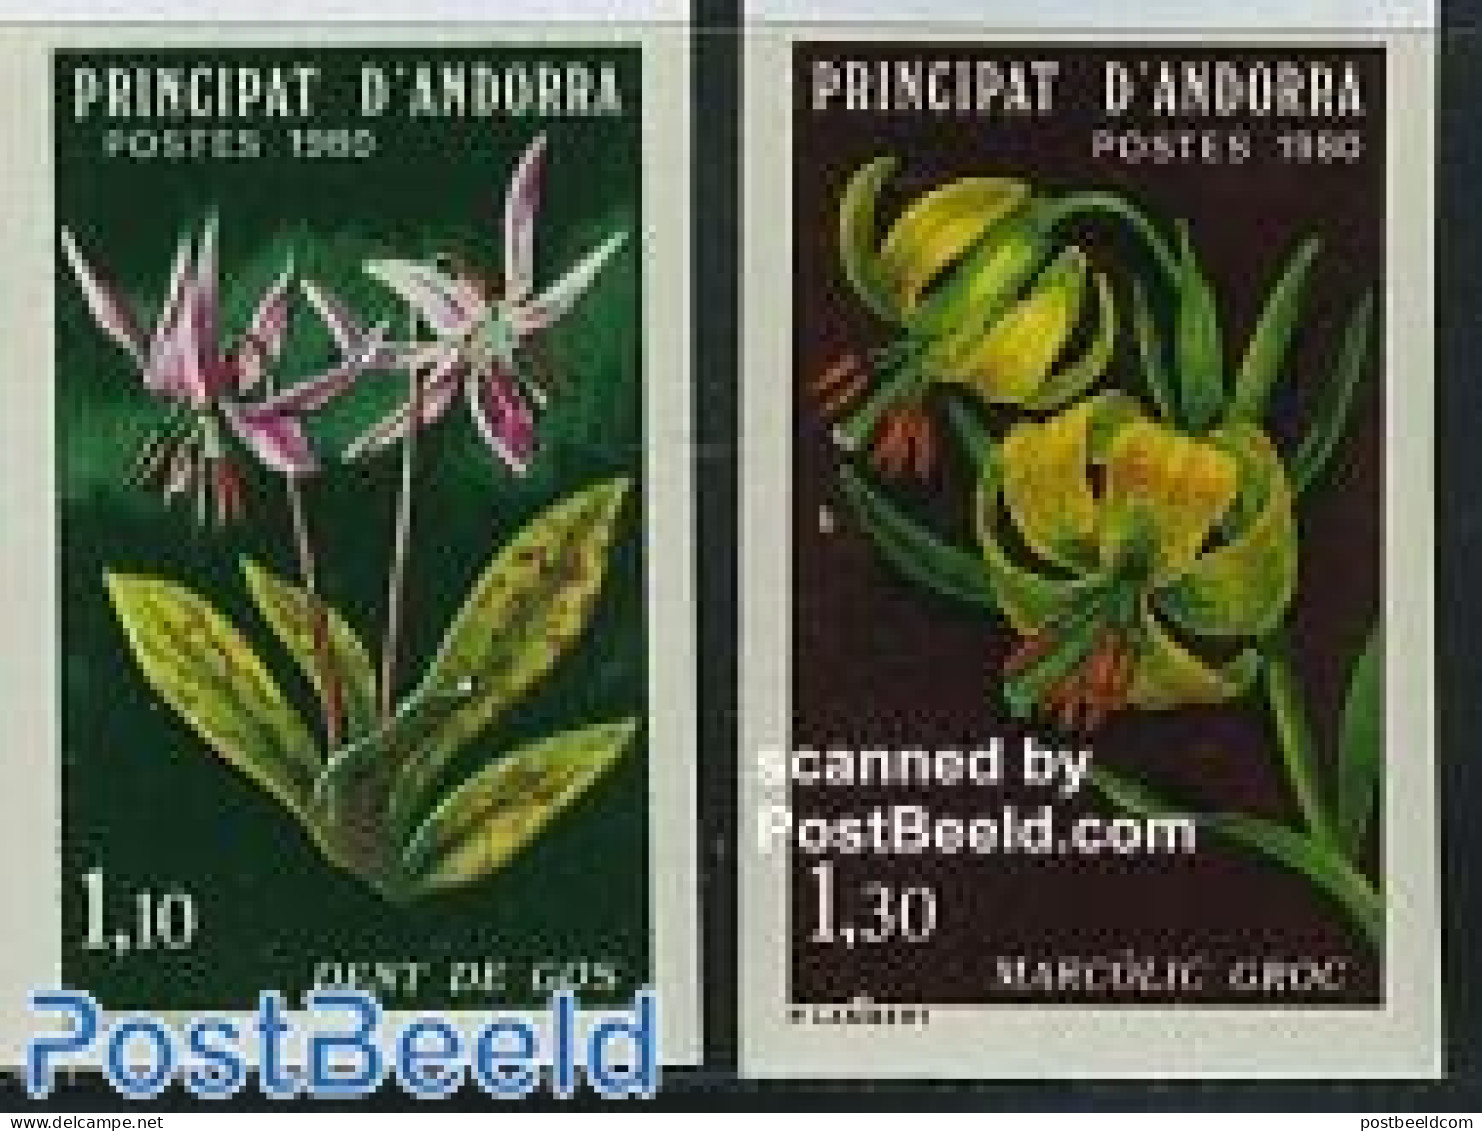 Andorra, French Post 1980 Flowers 2v Imperforated, Mint NH, Nature - Flowers & Plants - Ungebraucht